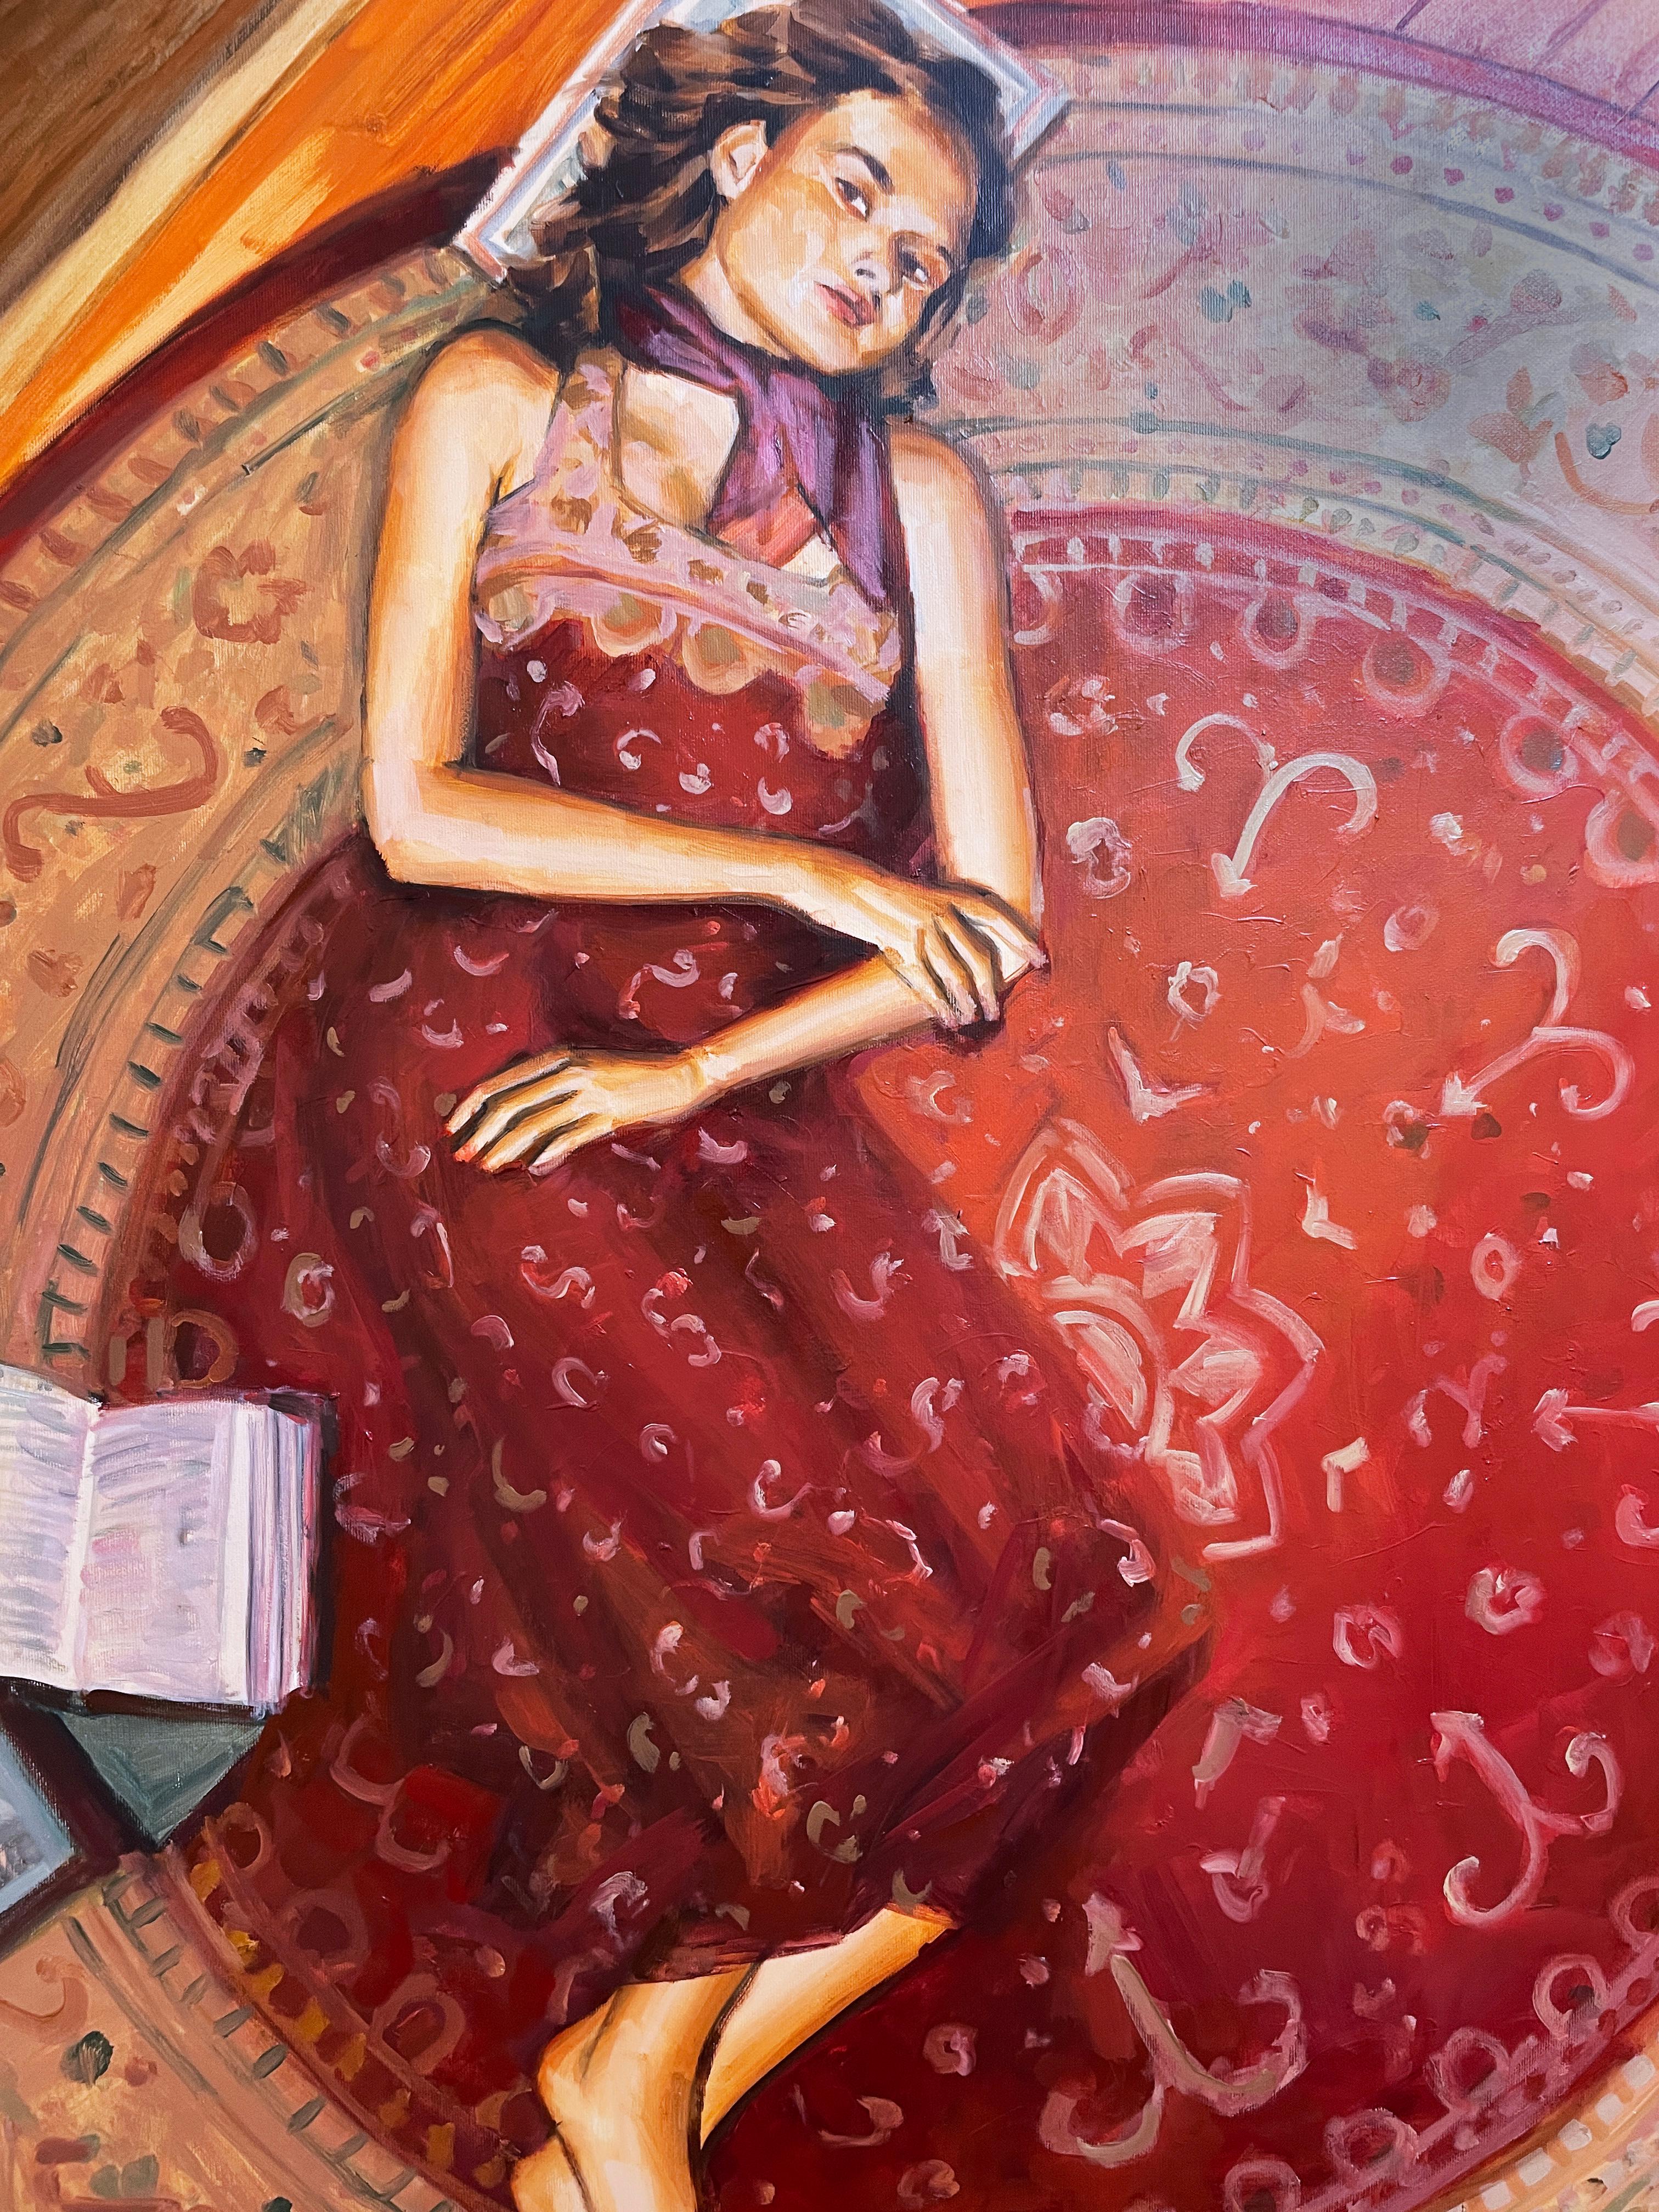 Day Dreaming (2022) oil on canvas, figurative, woman with books, red, pattern For Sale 1